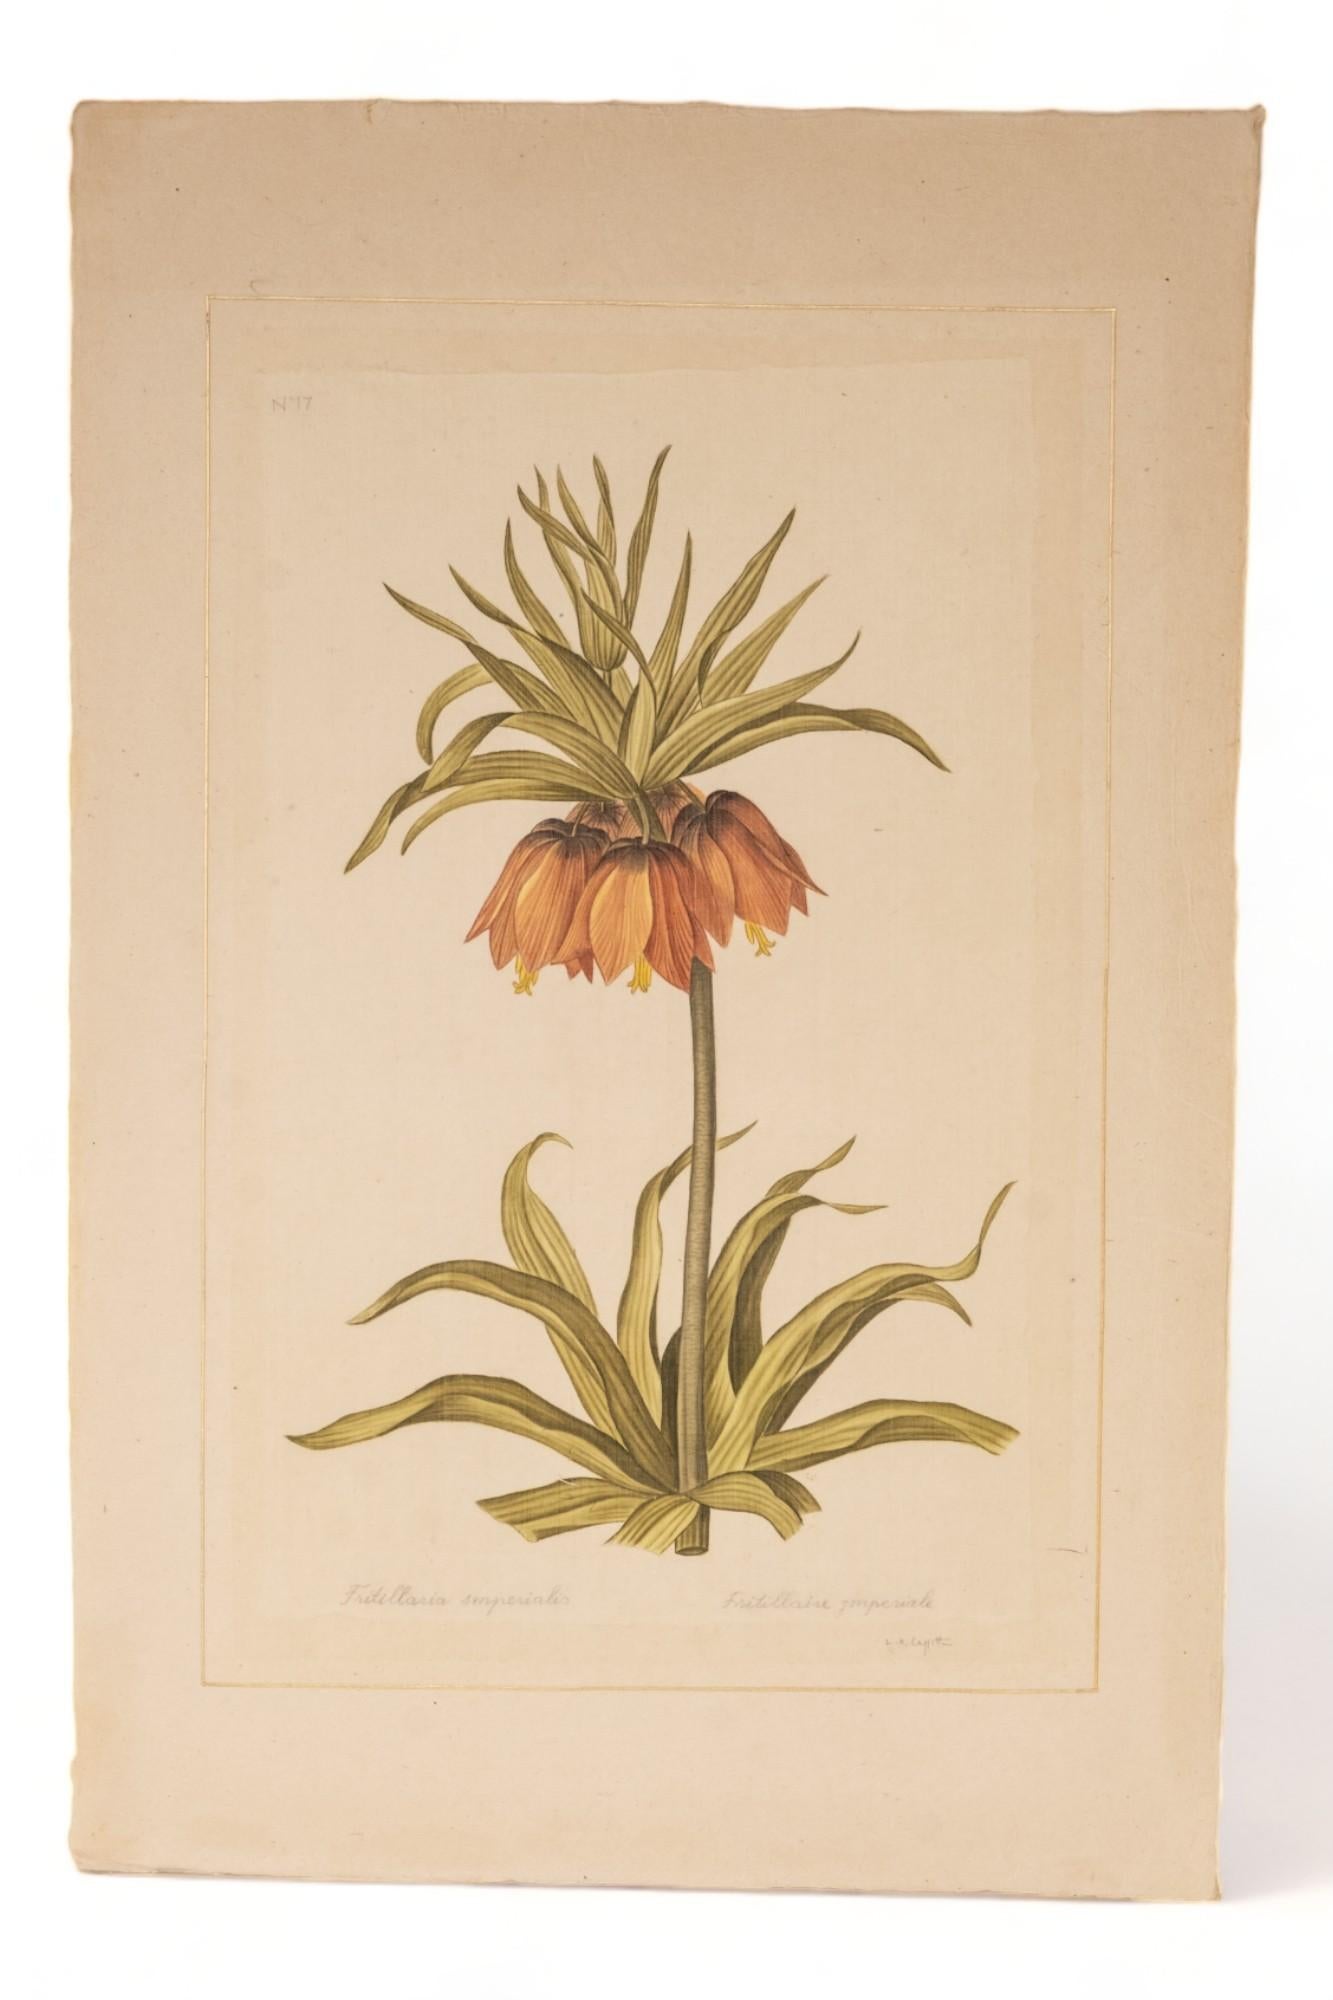 Signed L.R Laffitte Watercolor of fritillaria imperialis on silk mounted on laid paper, Signed in pencil at the bottom

